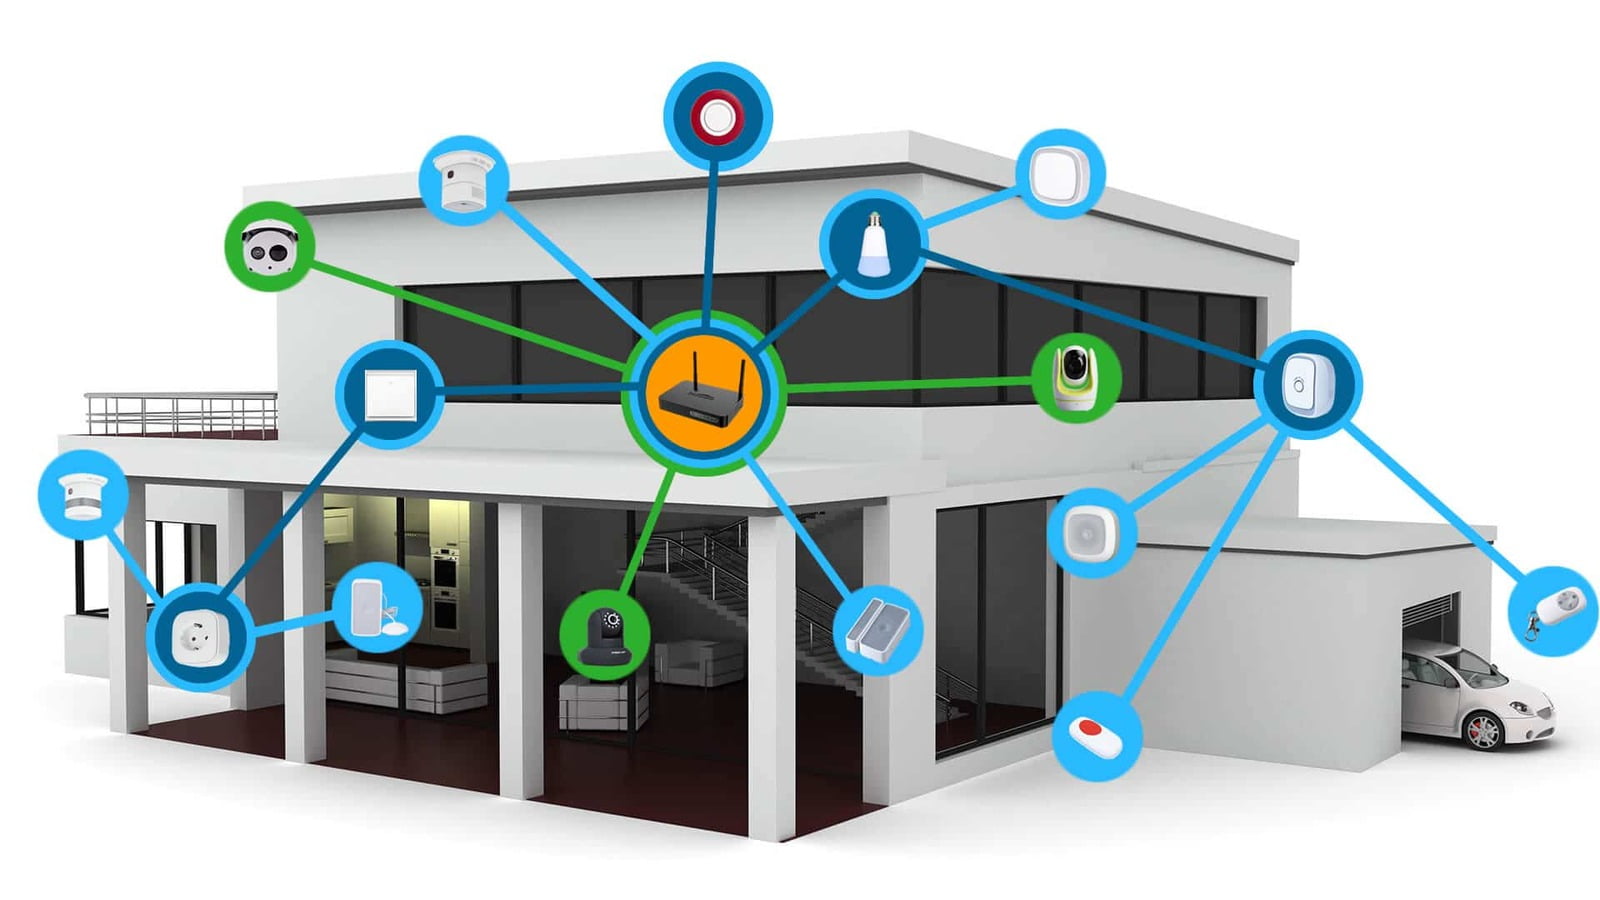 Smart Home Automation Systems